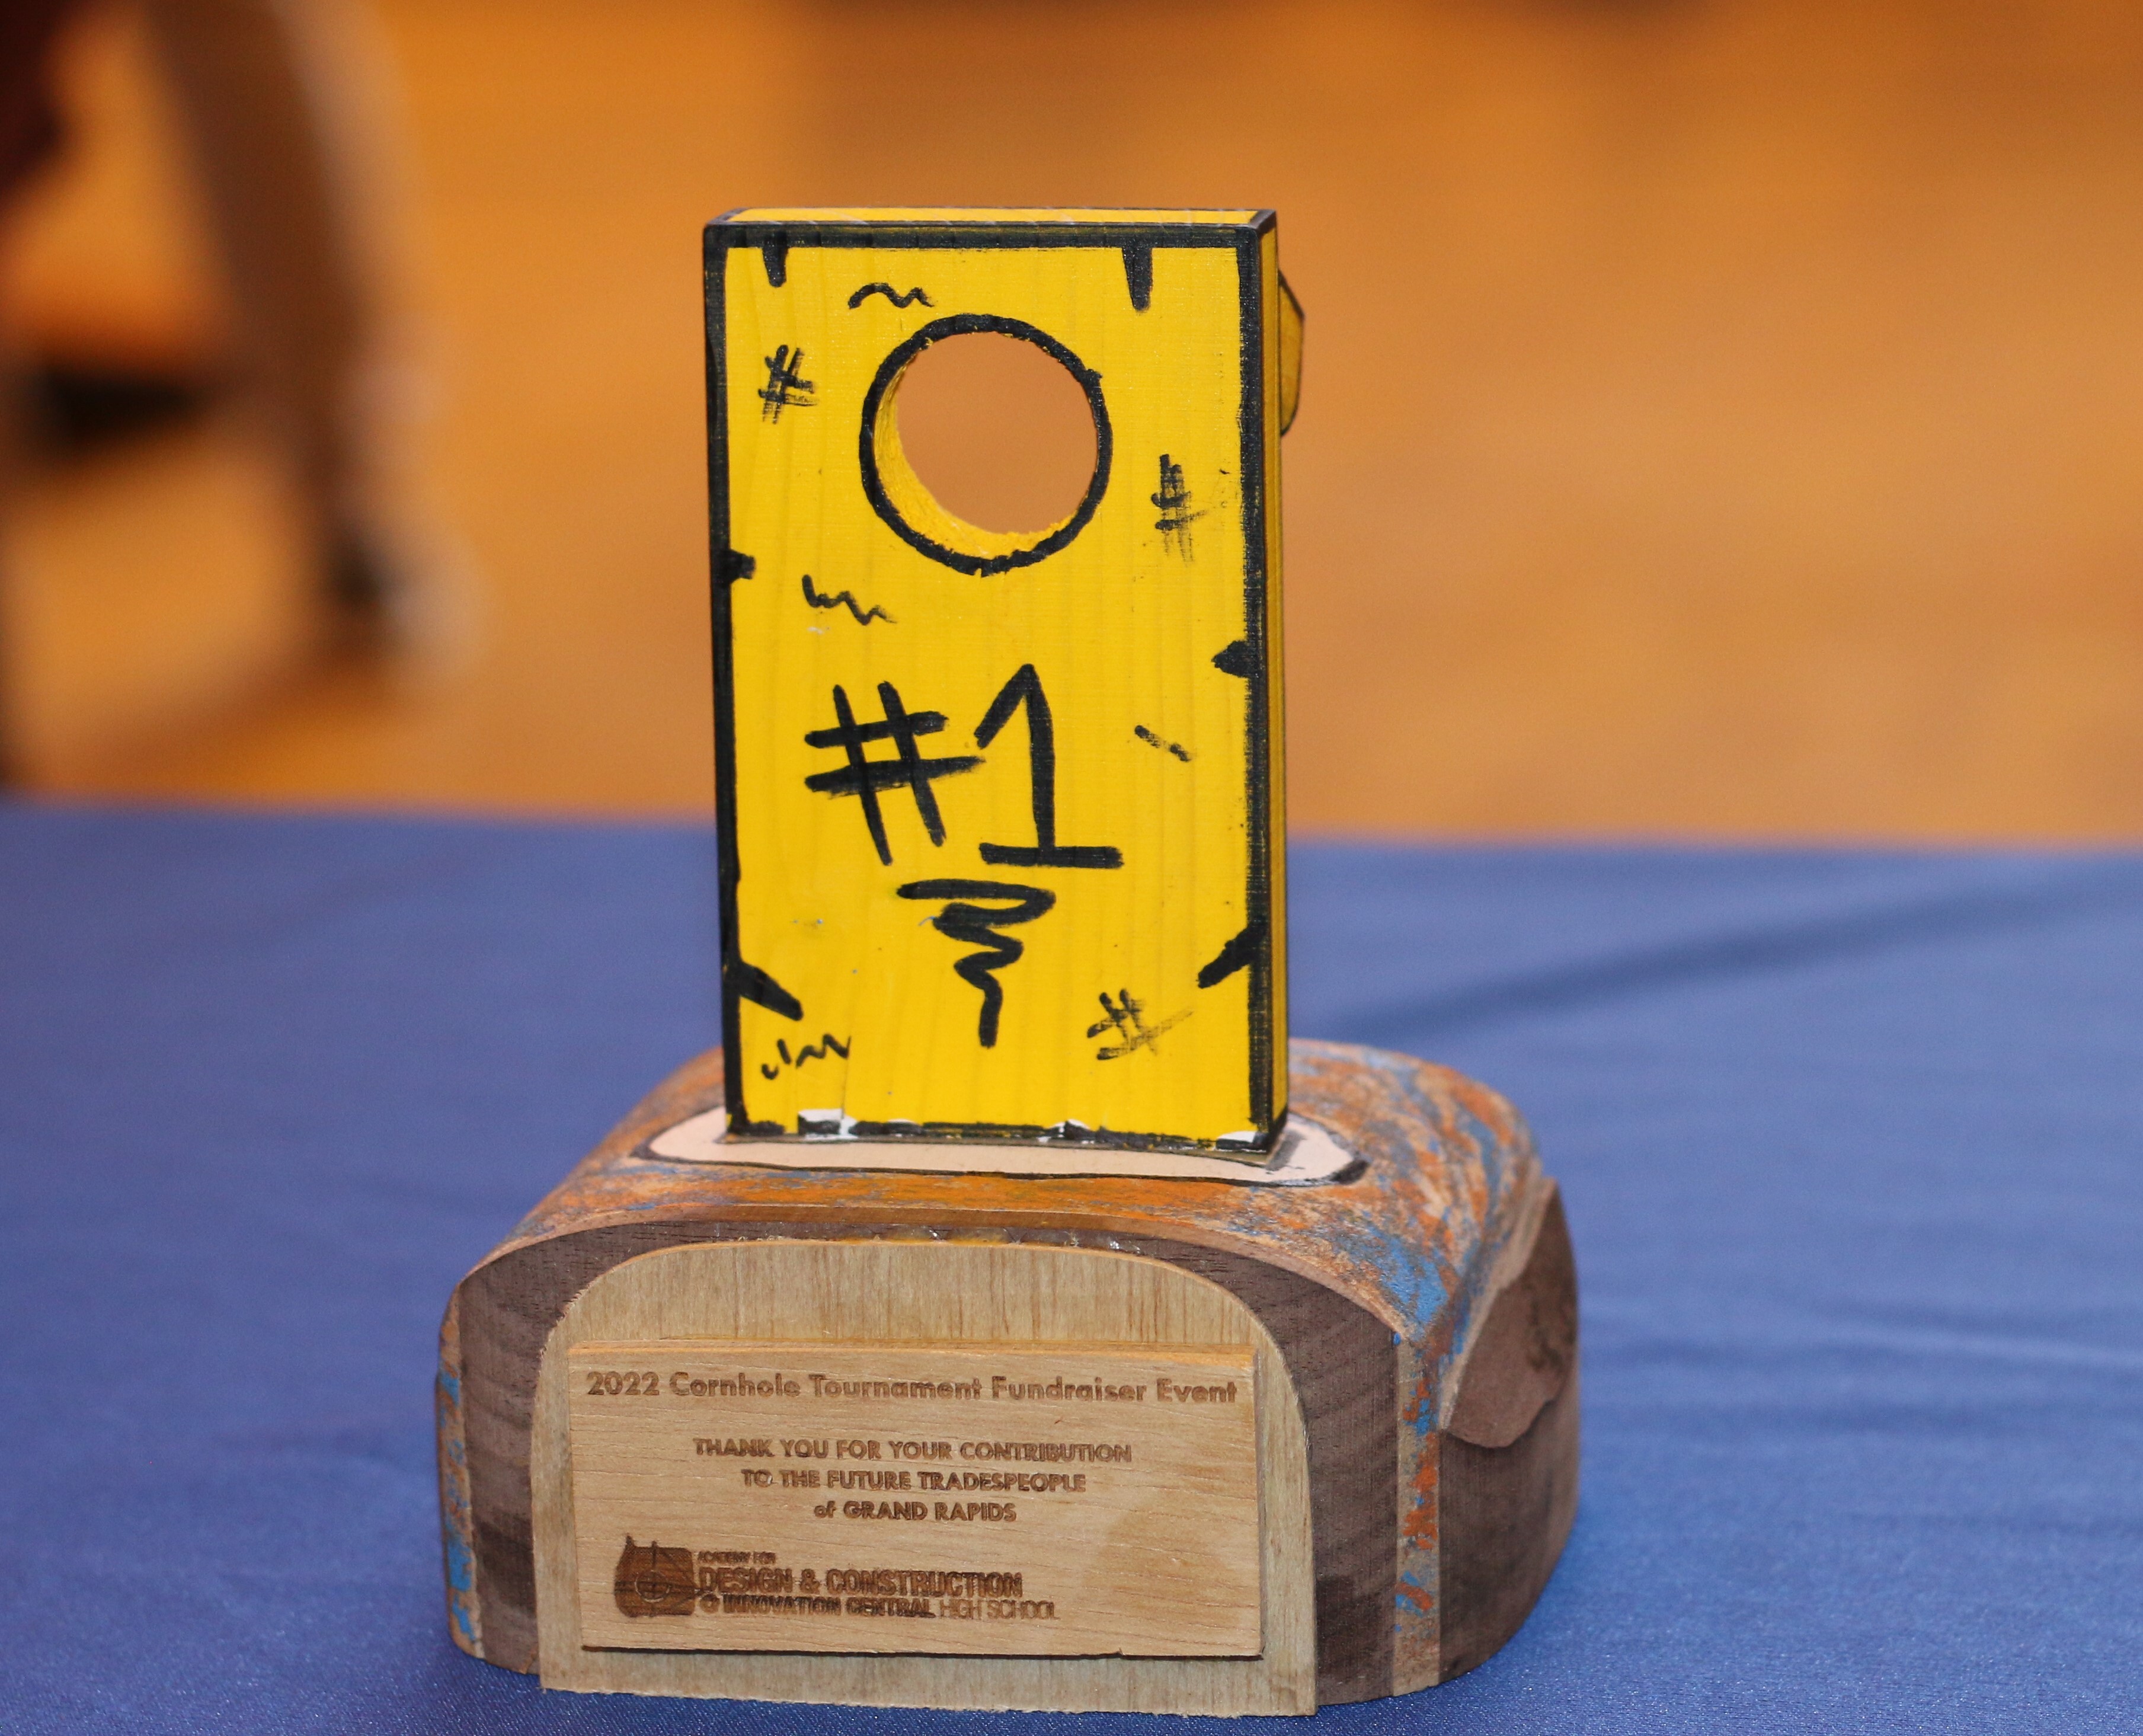 All of the trophies in the cornhole tournament were created by students in the Academy of Design and Construction